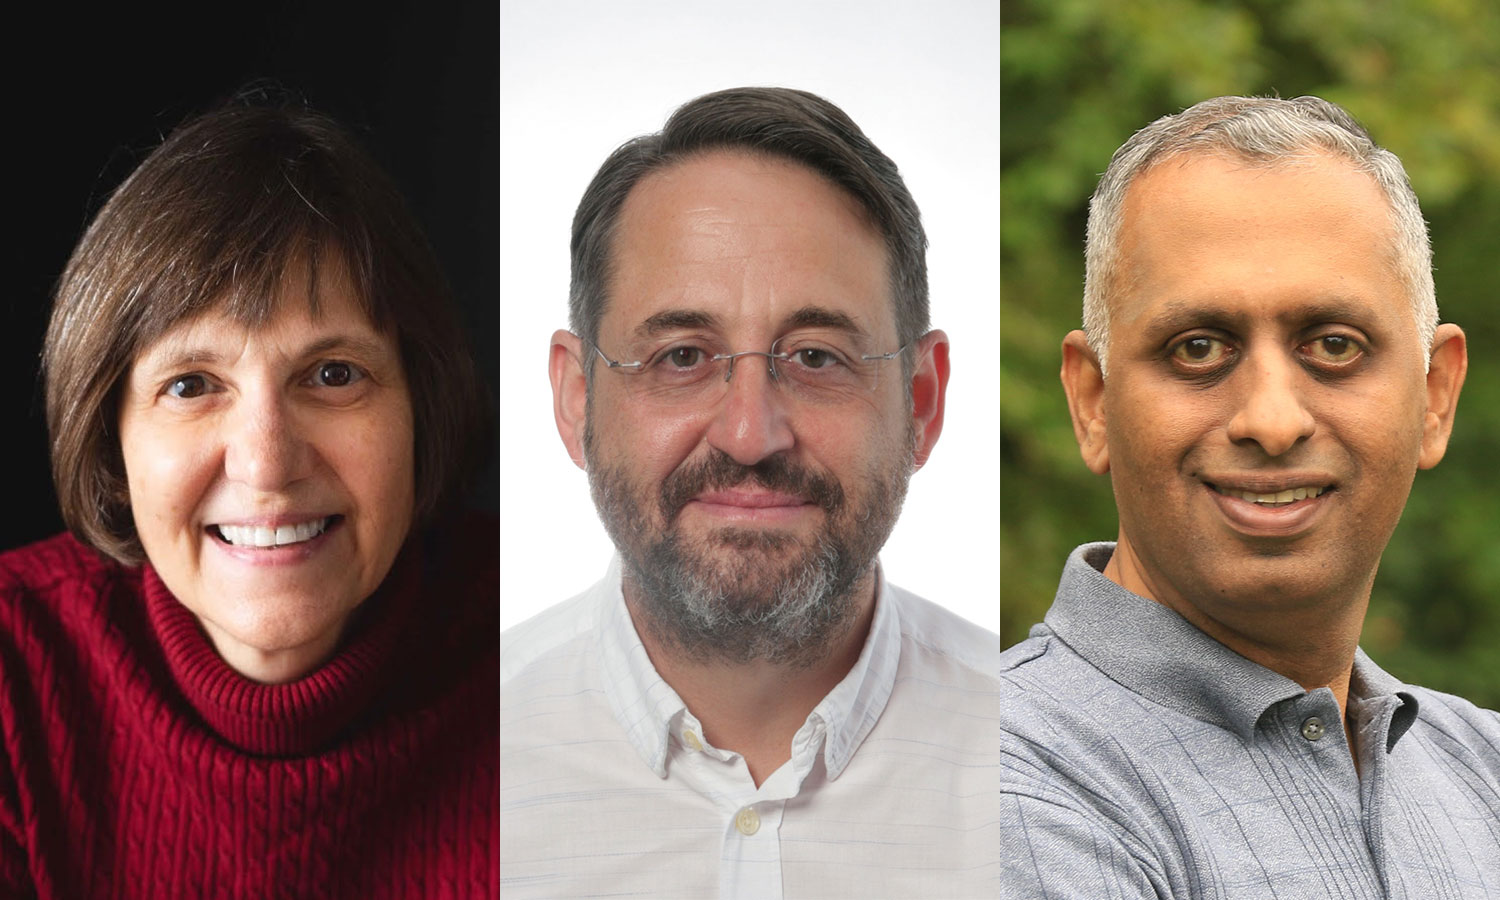 From left: From left: Marianne Vermeer, M.B.A.; Kai Donsbach, Ph.D.; Rajappa Vaidyanathan, Ph.D.